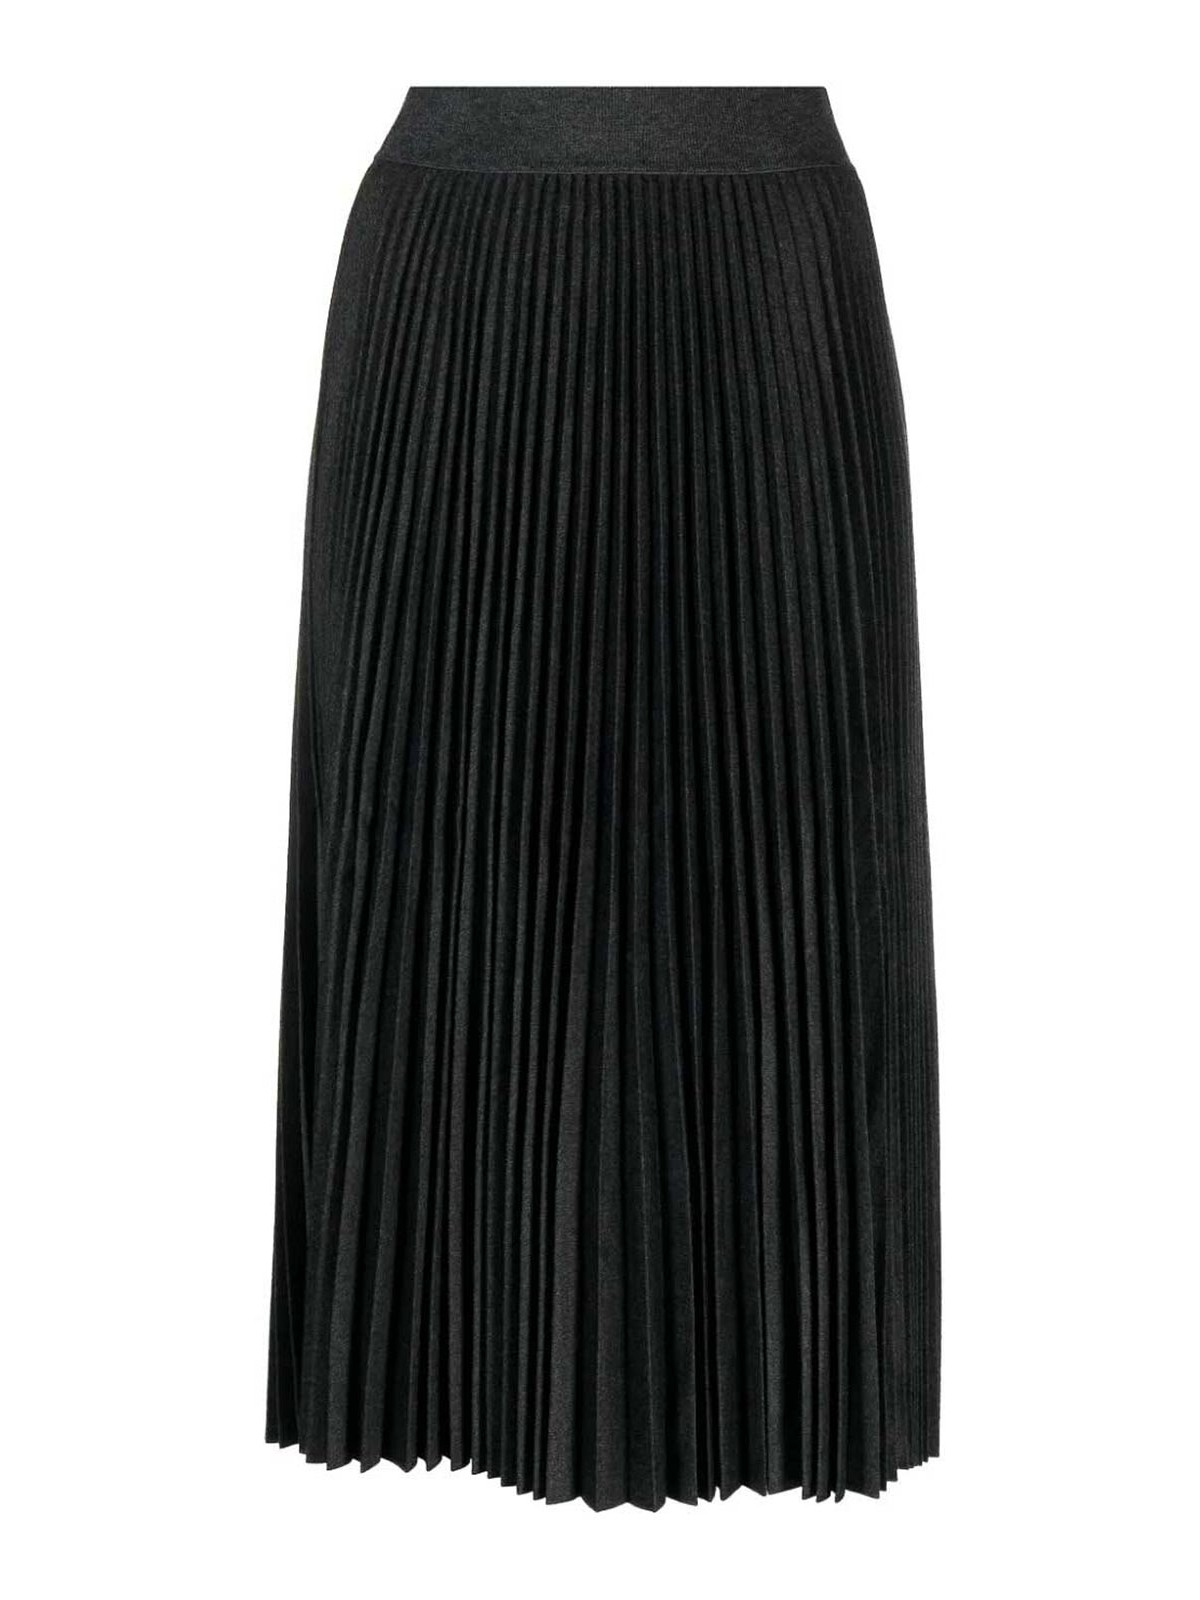 THEORY PLEATED SKIRT